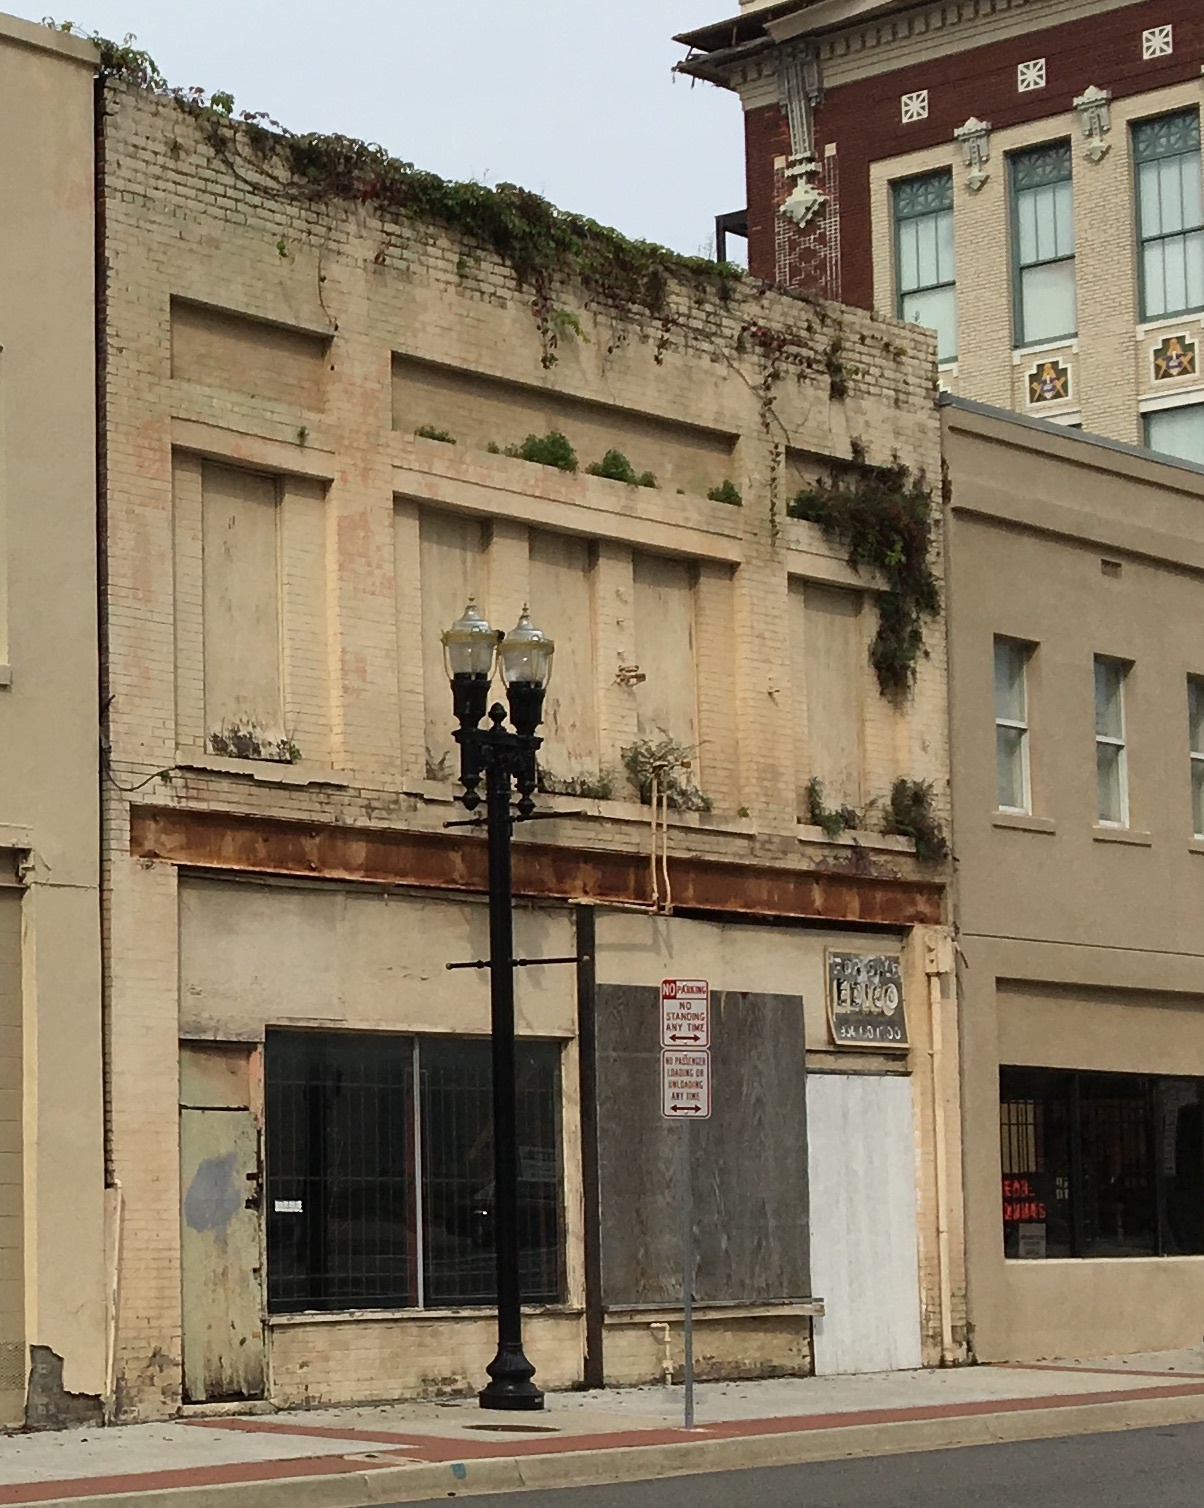 The Downtown Investment Authority has been searching for a person or group to redevelop this vacant property at 324 N. Broad St.